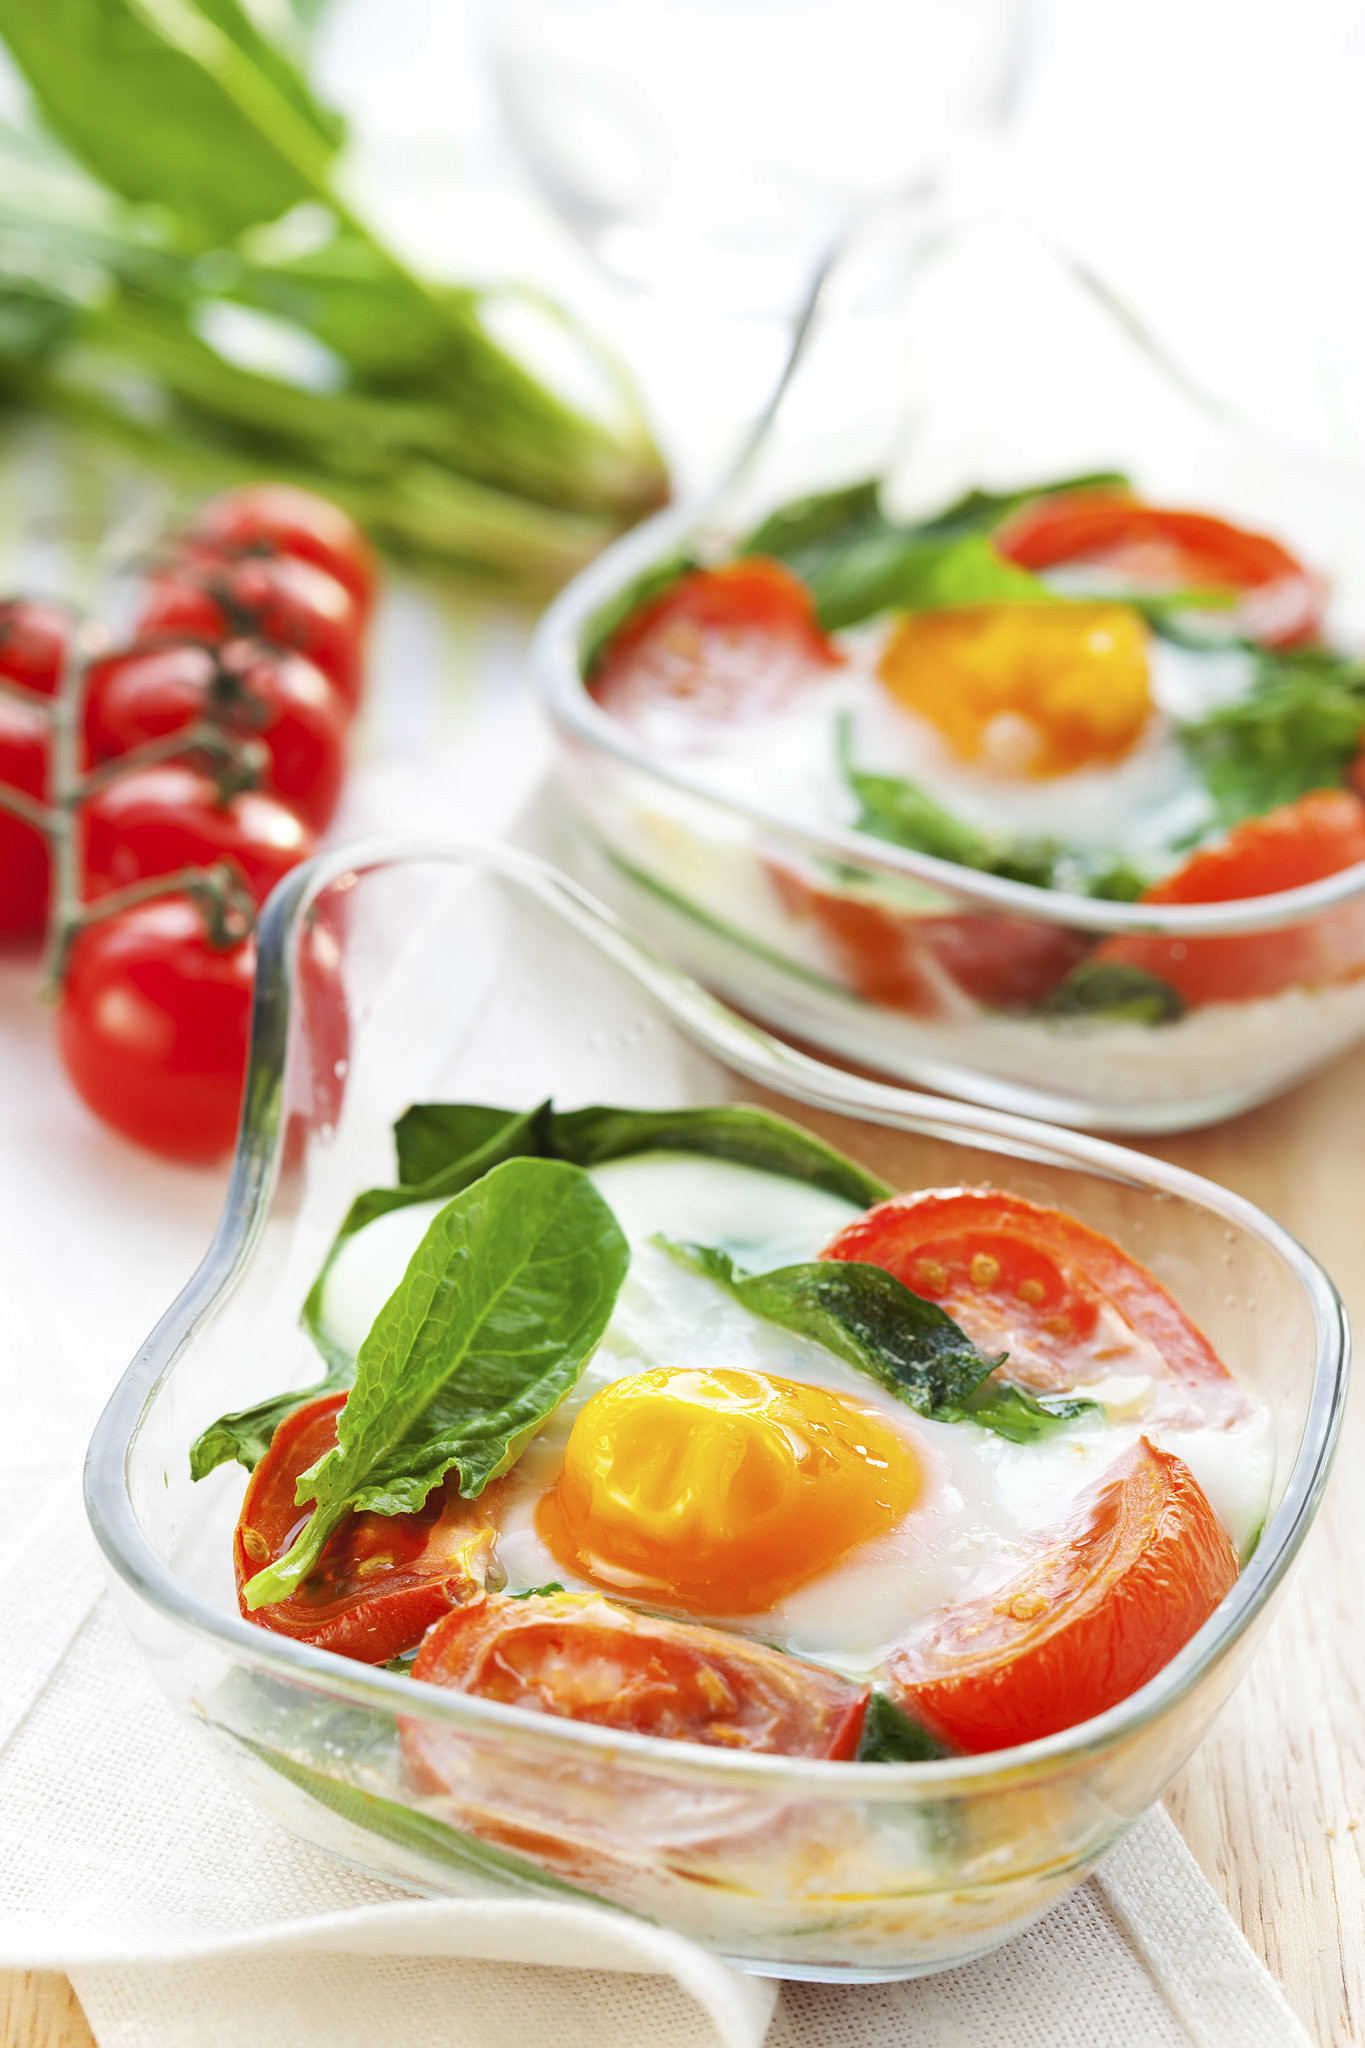 Yummy Healthy Breakfast
 50 High Protein Breakfasts That Are Healthy And Delicious